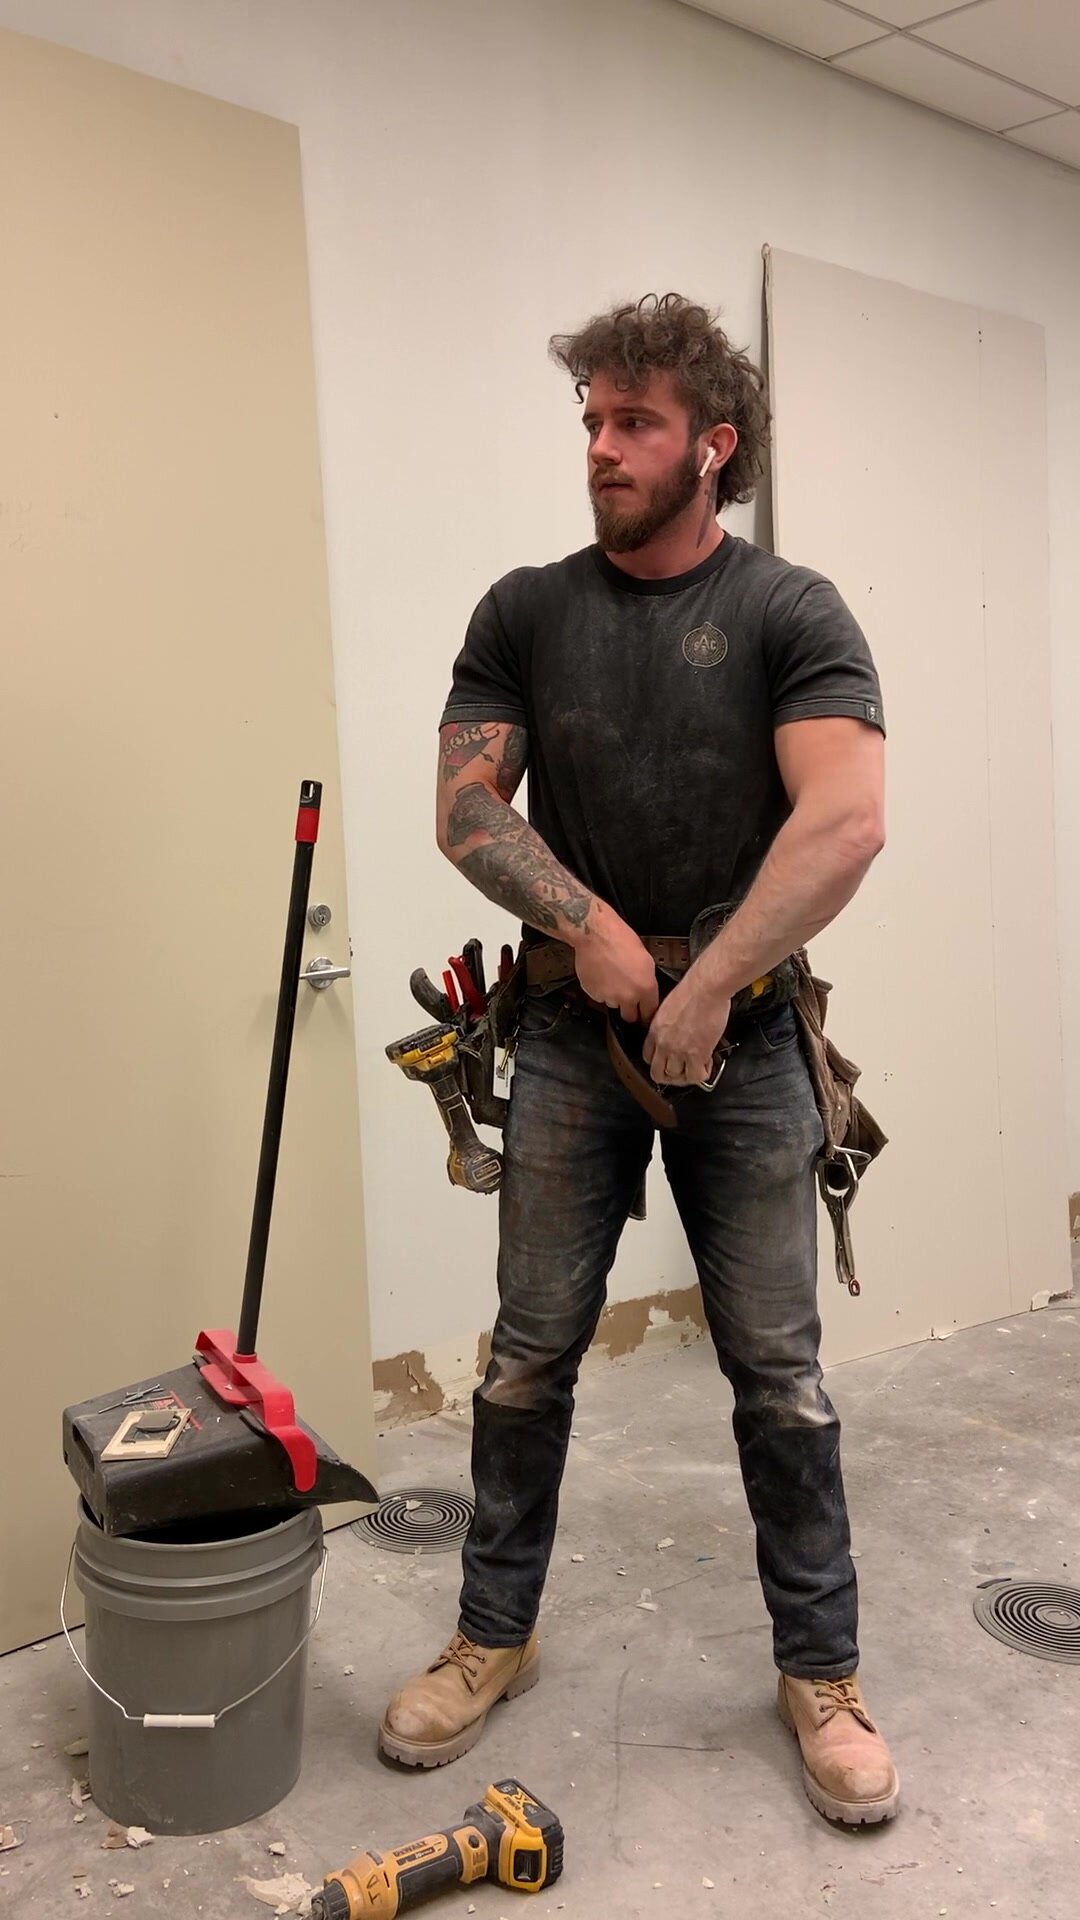 Hunk Construction Worker photo